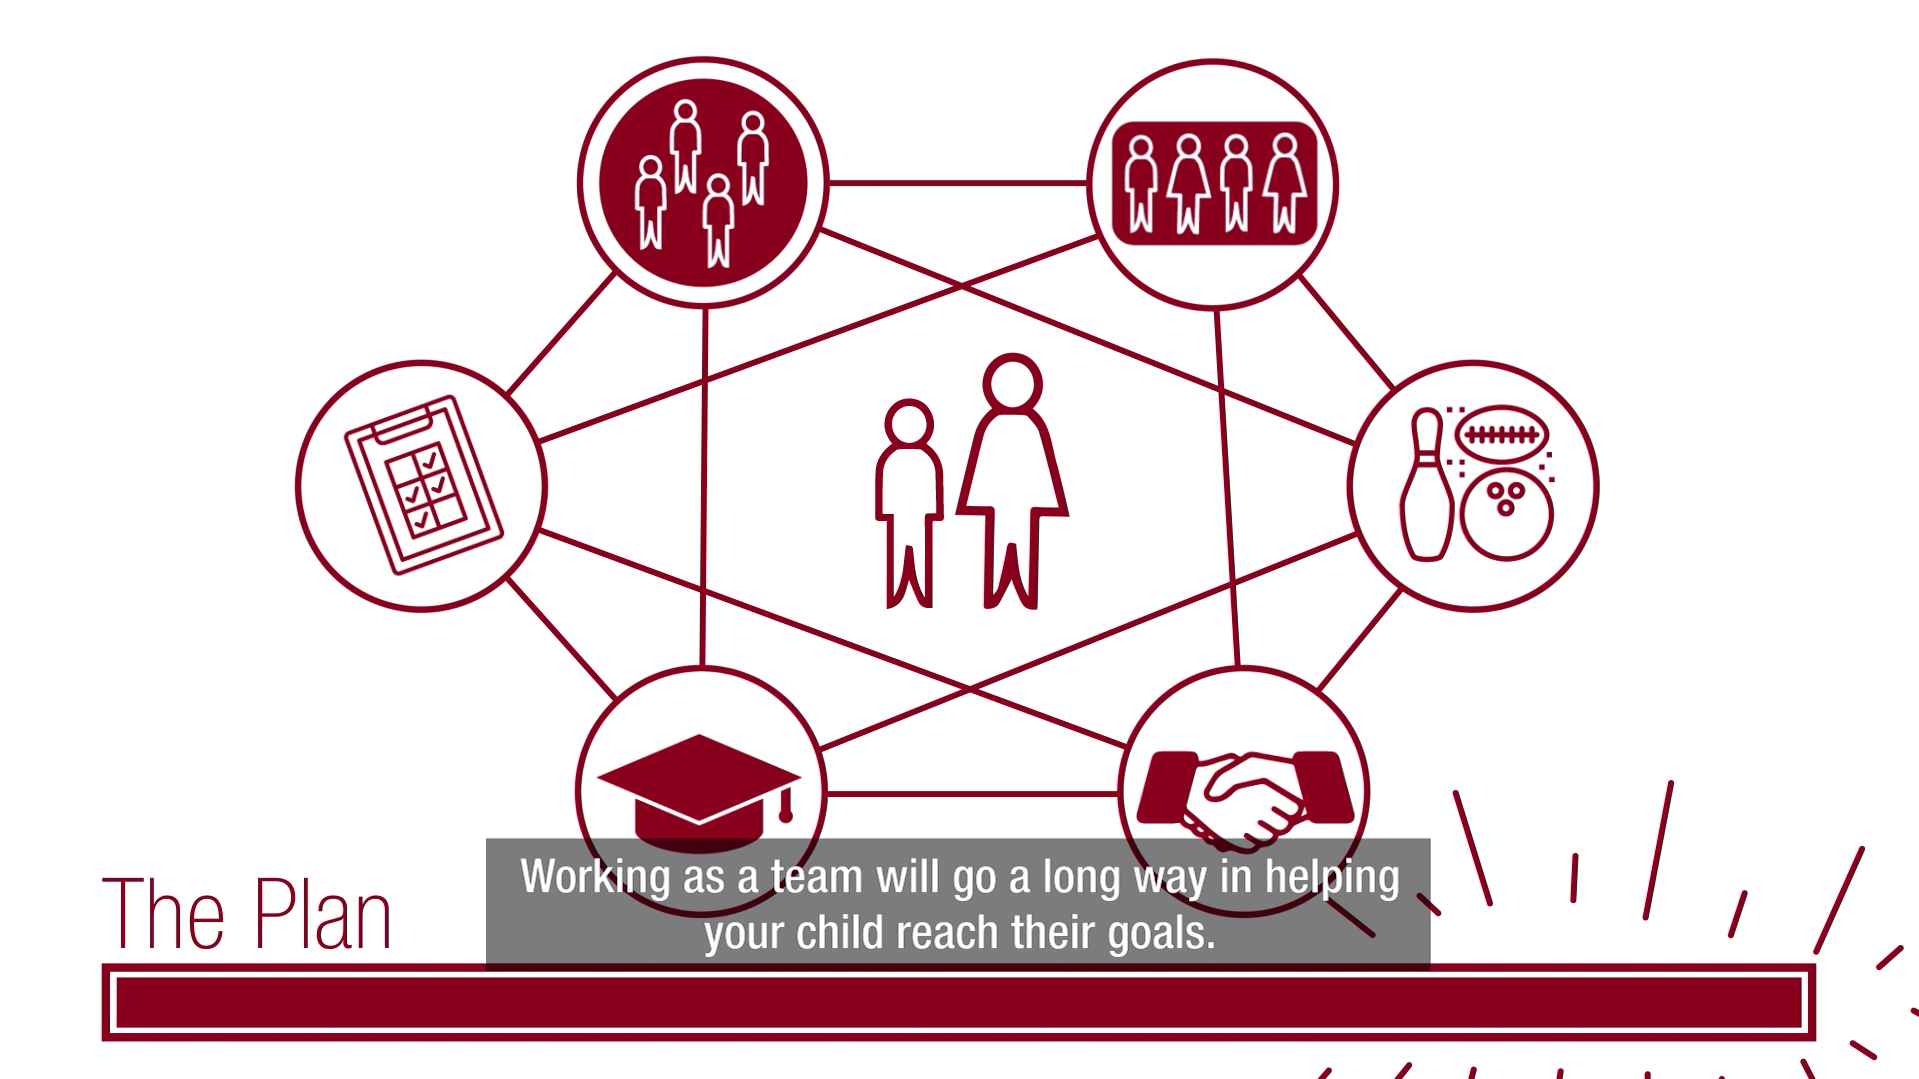 screen shot of a image from the video of many circles all linking together with a line. each circle has a diagram inside of people, hand shaking or a graduation cap